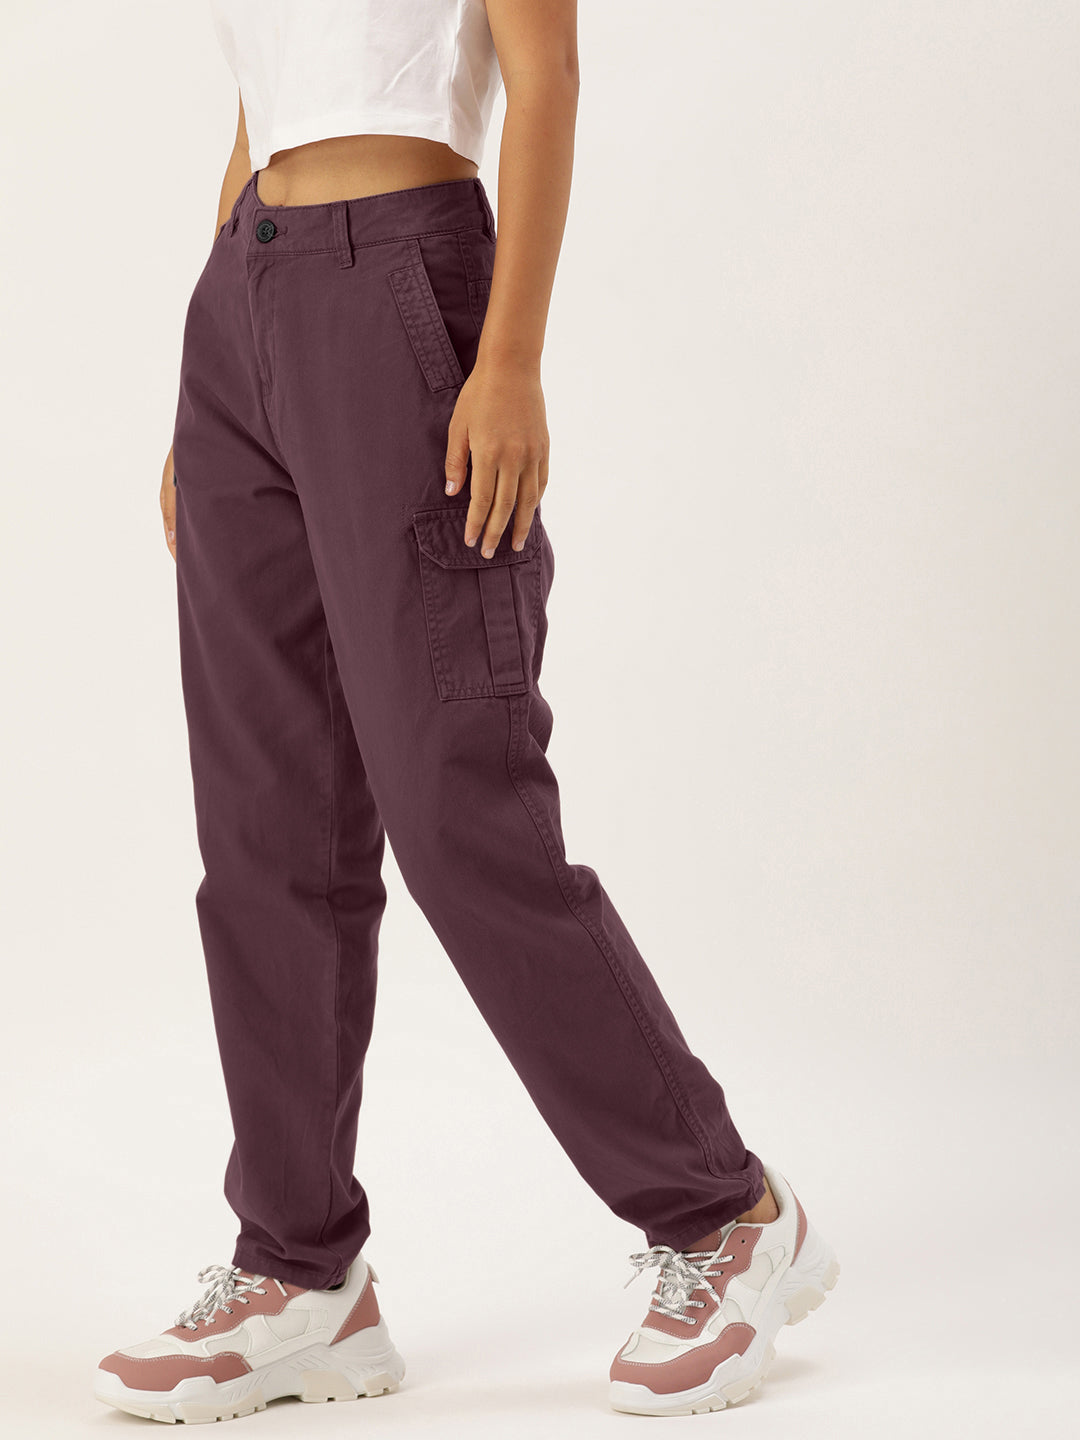 Hey June Bryce Cargo Pants Downloadable Sewing Pattern | Harts Fabric